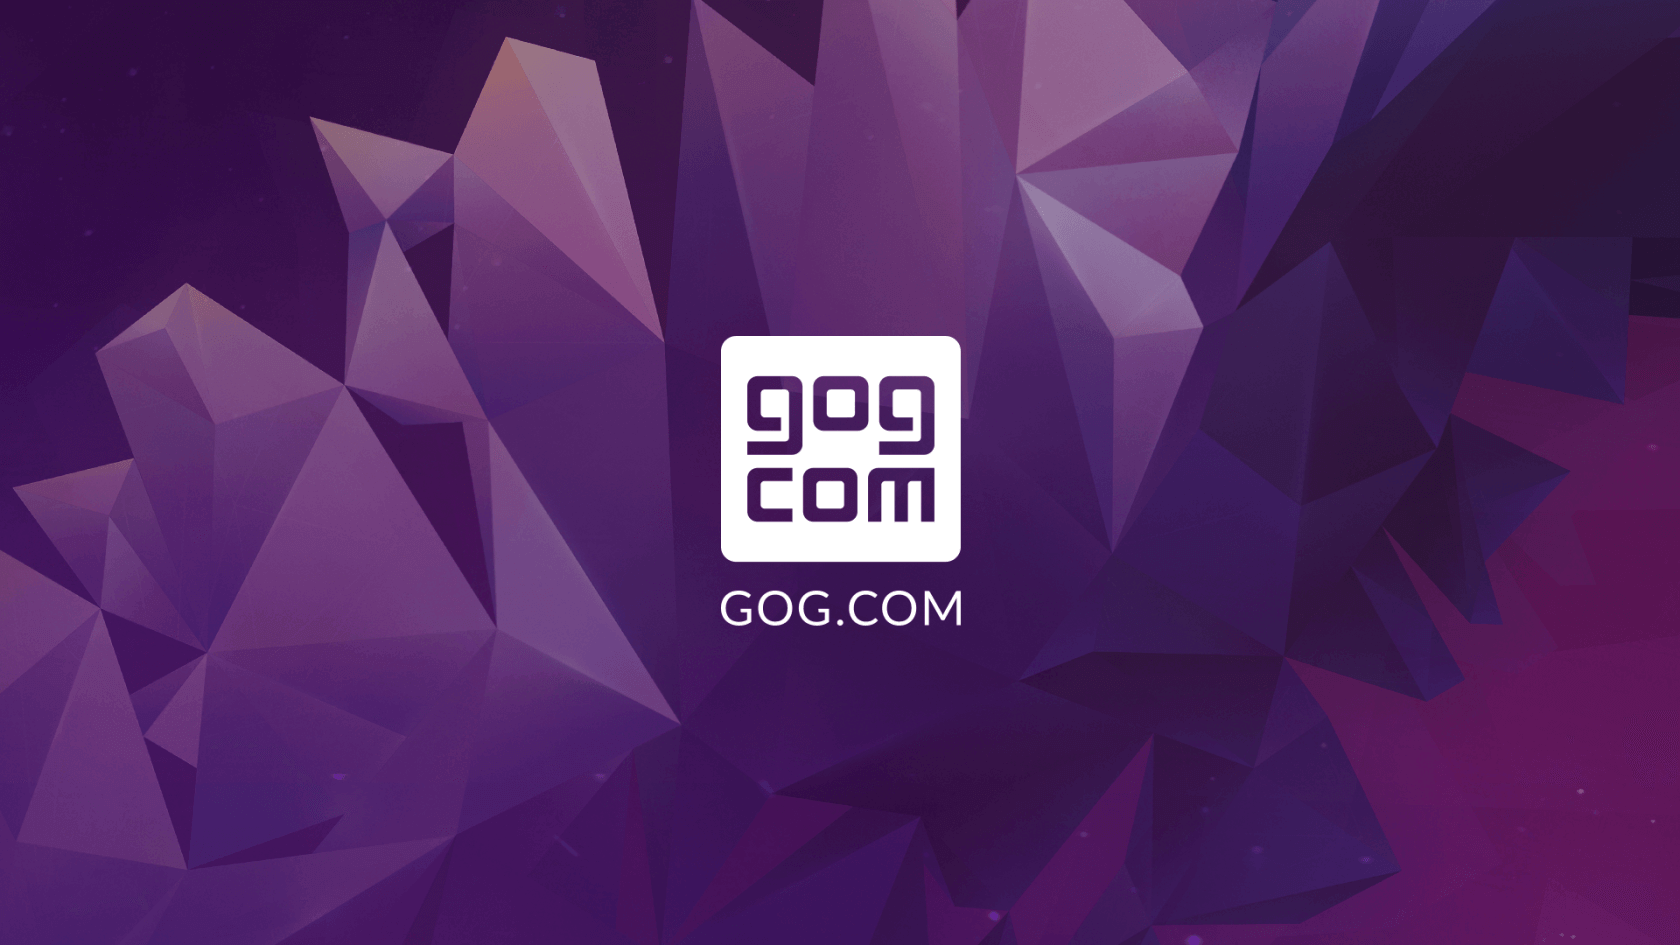 GOG celebrates its 11th anniversary by discounting some great games this weekend